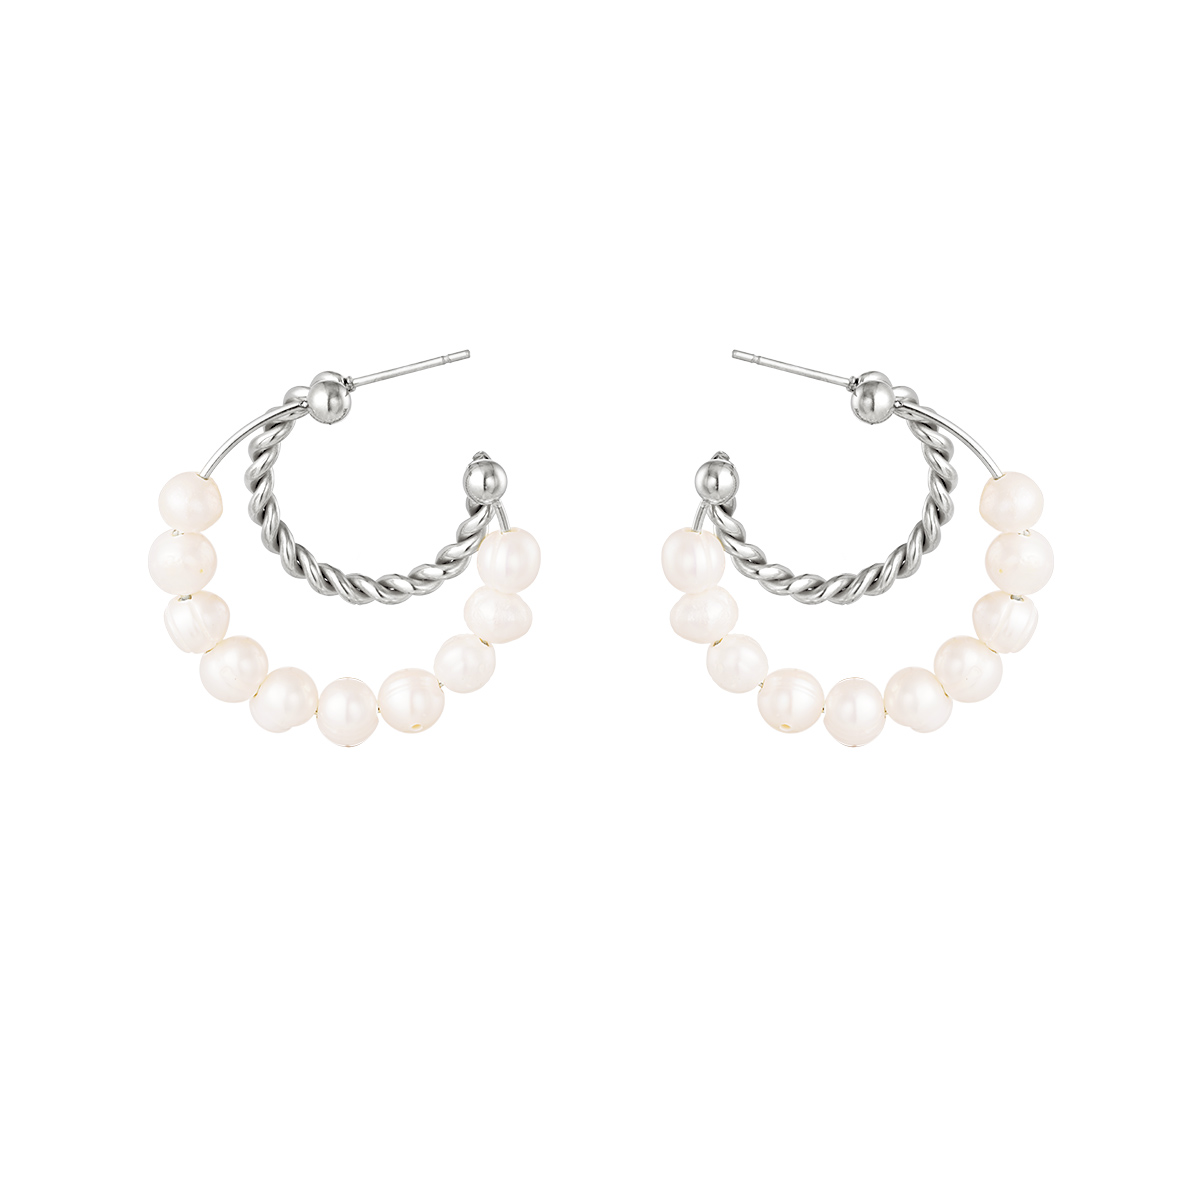 Earrings pearls with a twist